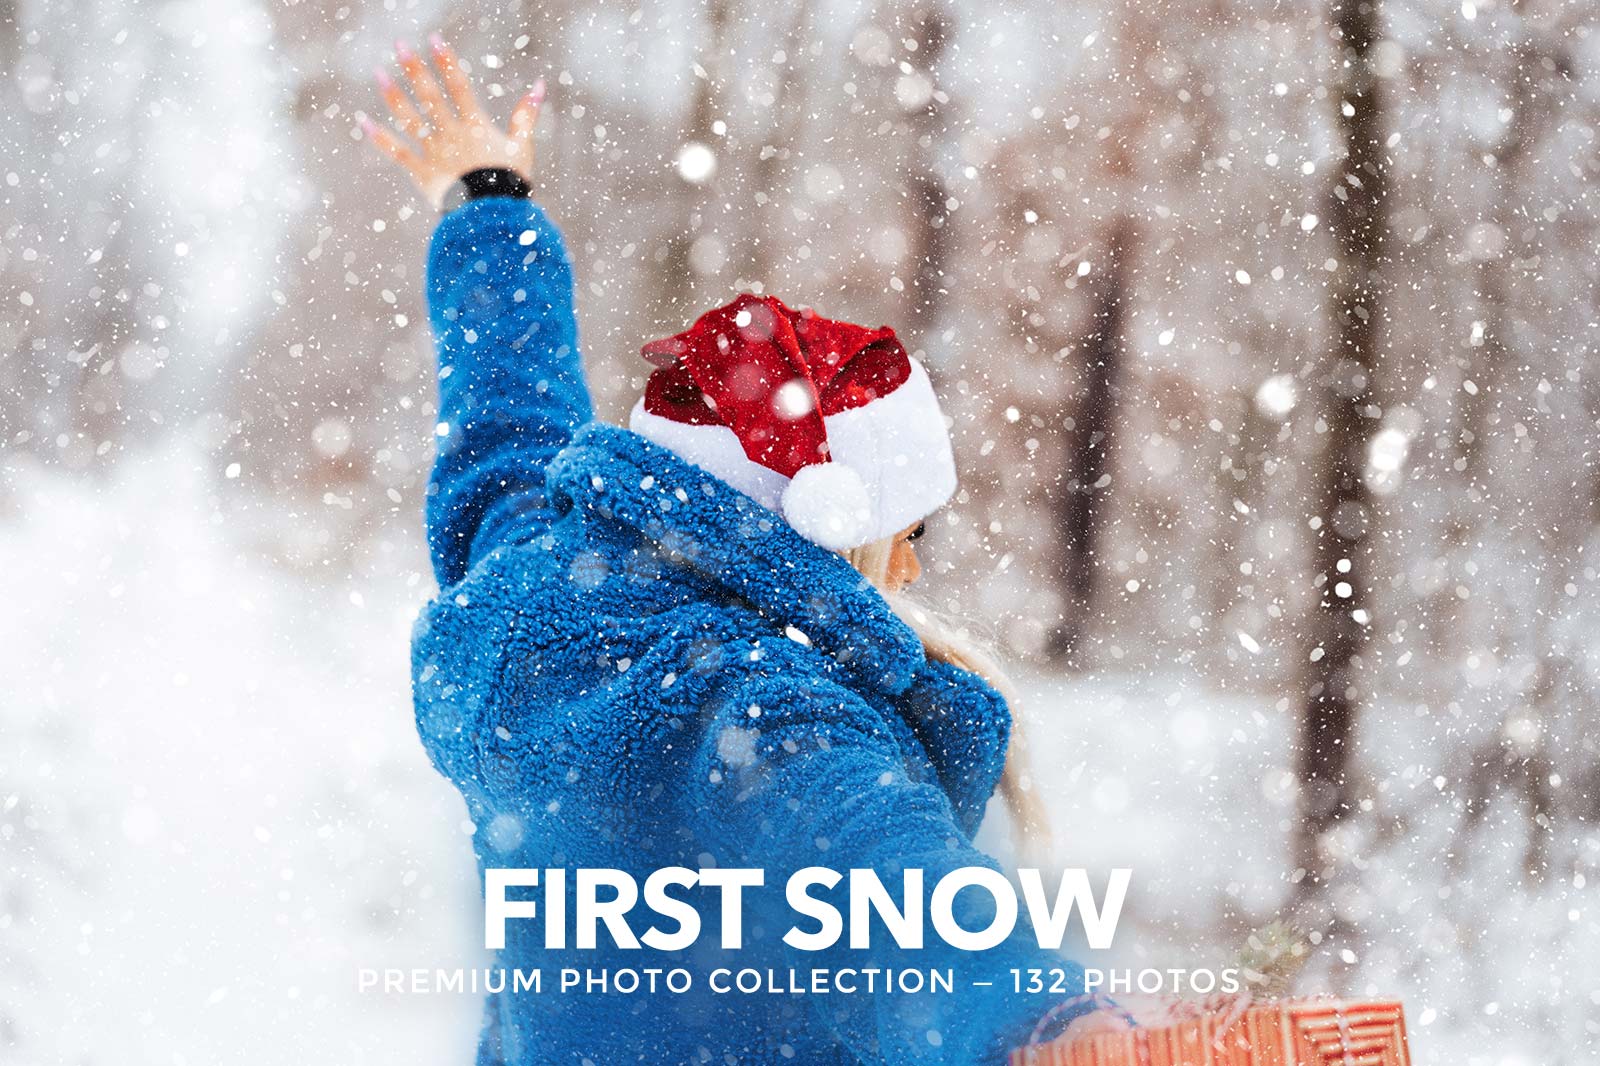 Download hi-res stock photos from our First Snow PREMIUM Collection!